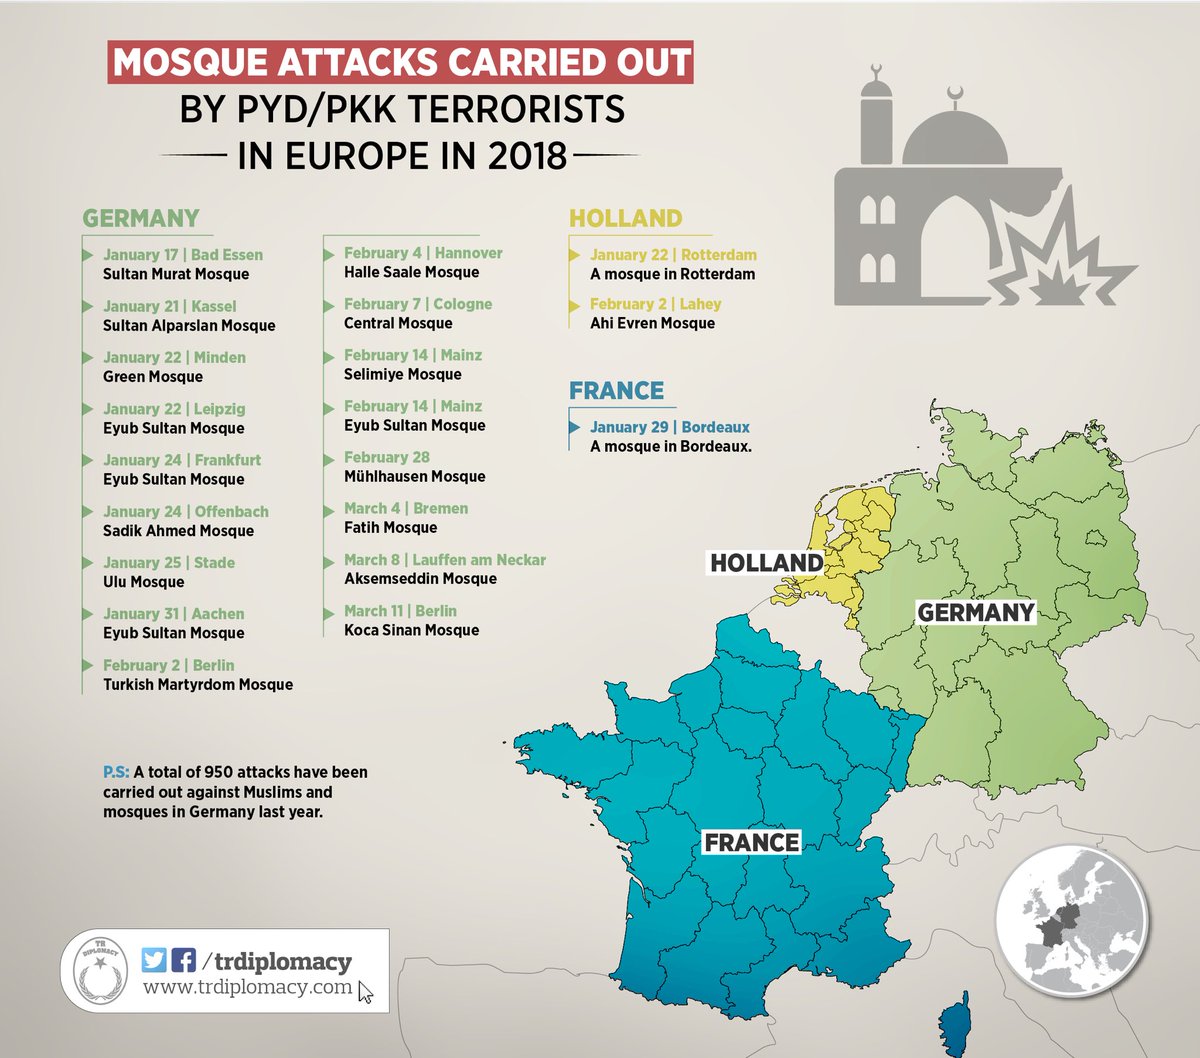 PKK/PYD terrorists are attacking mosques in Europe and European governments have yet to do something about it